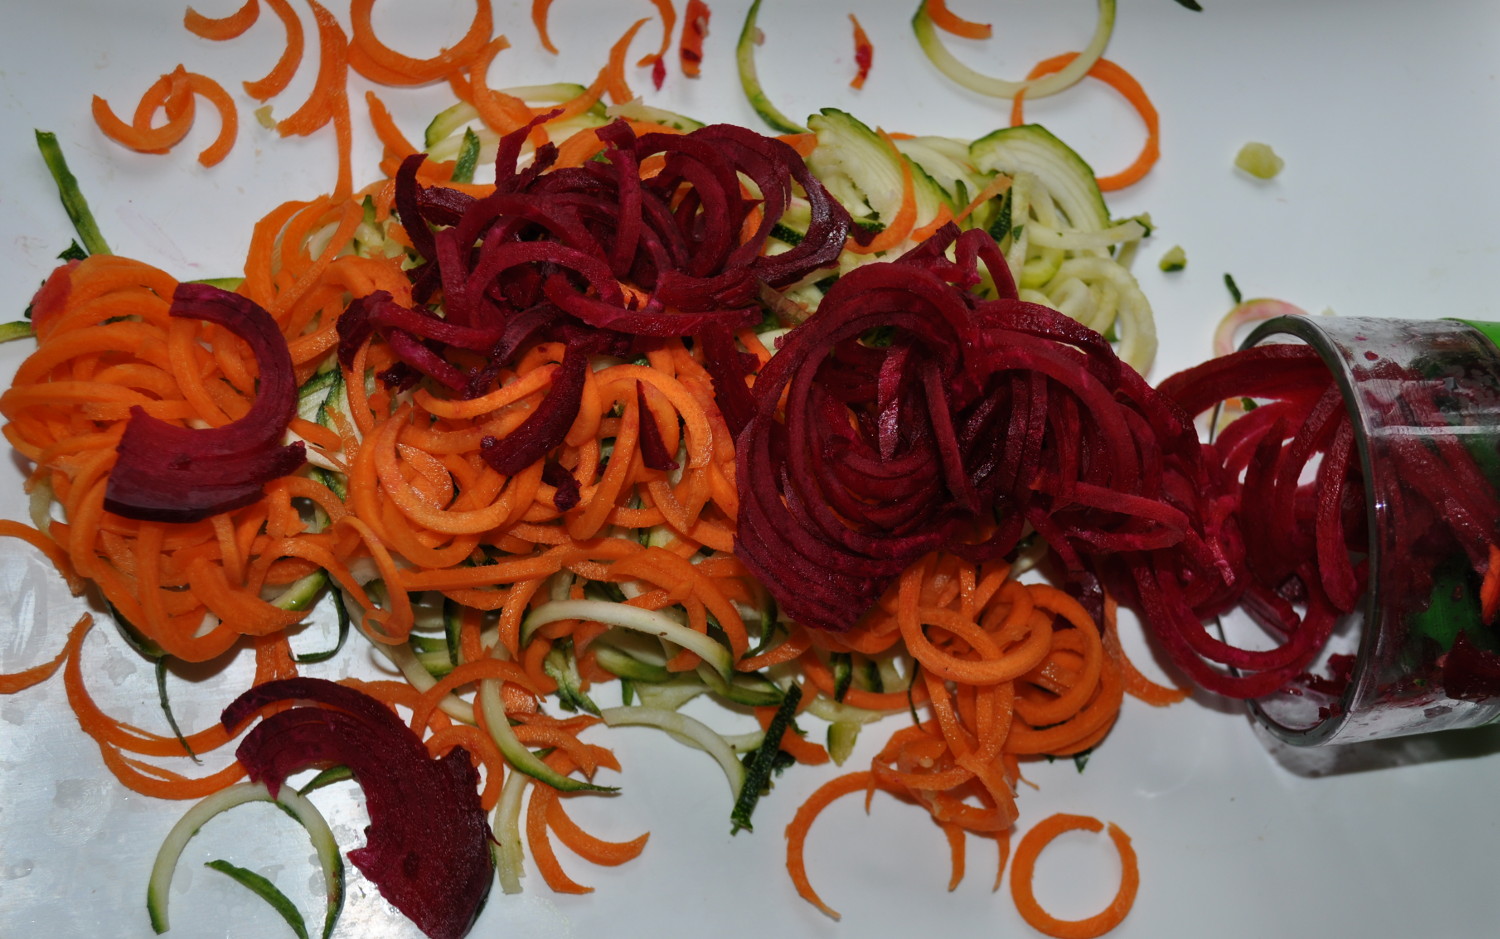 Spiralized vegetables, all done with the OXO handheld Spiralizer